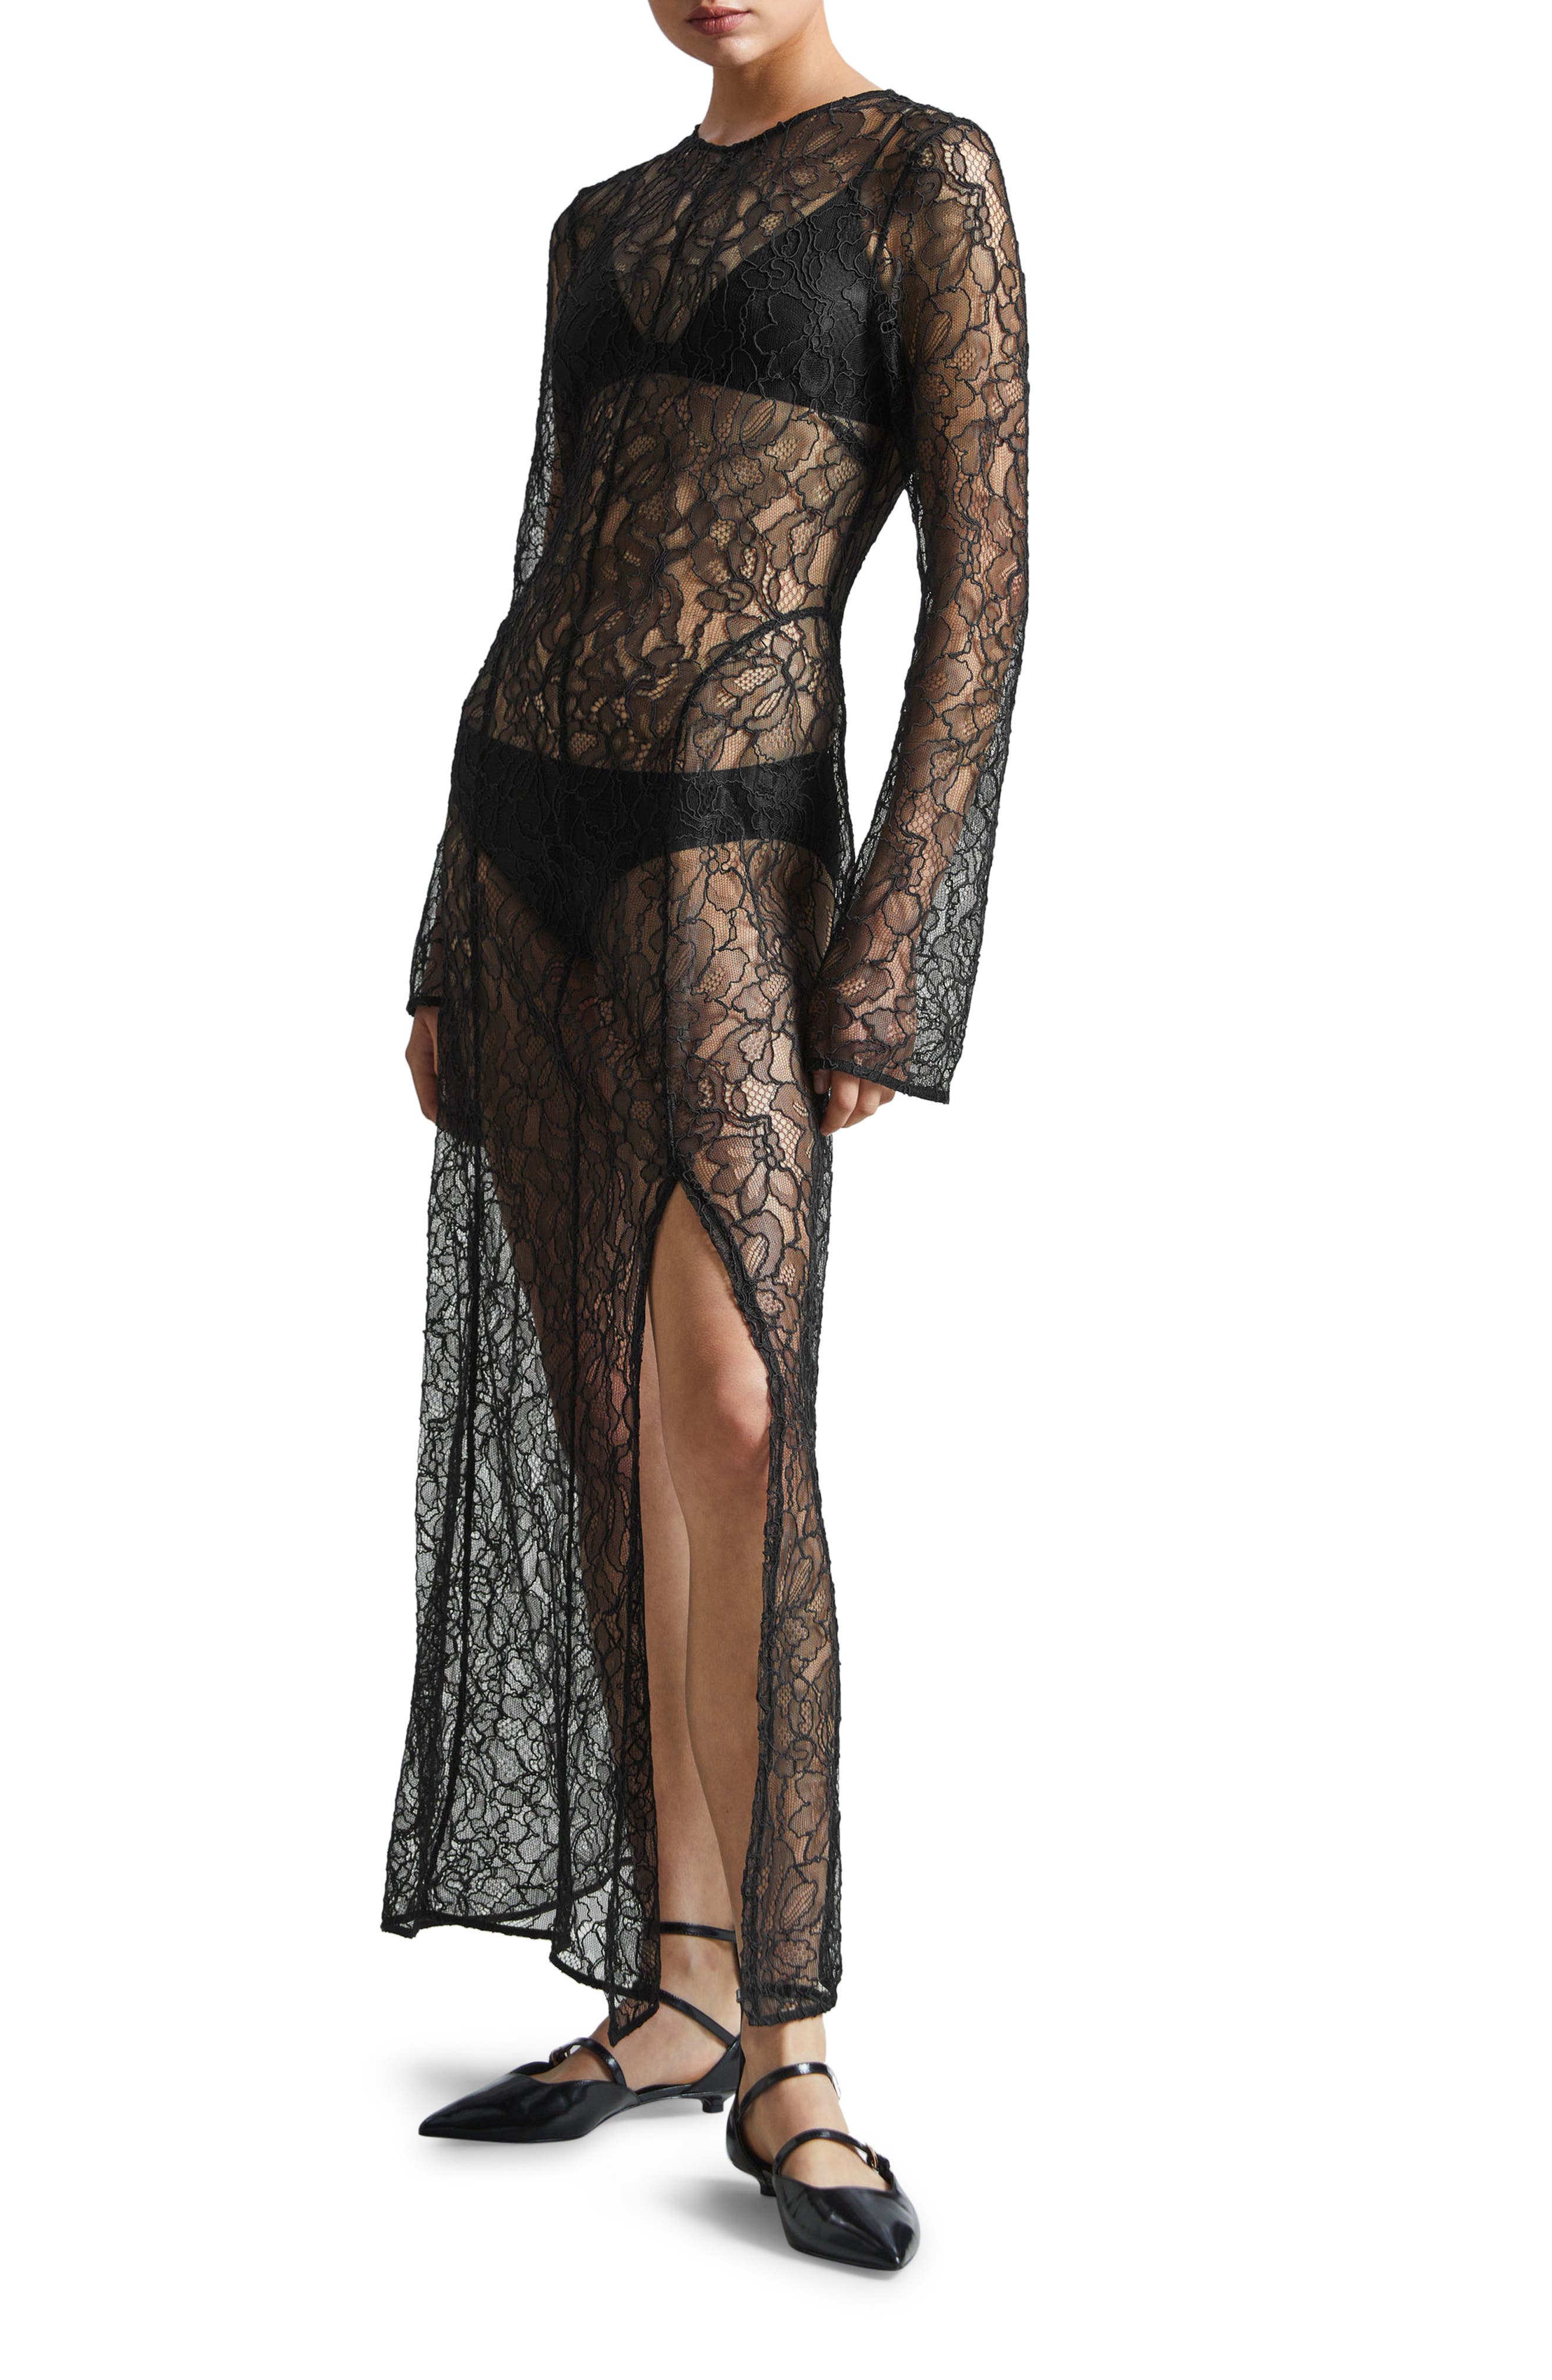 & Other Stories + Sheer Long Sleeve Lace Midi Dress